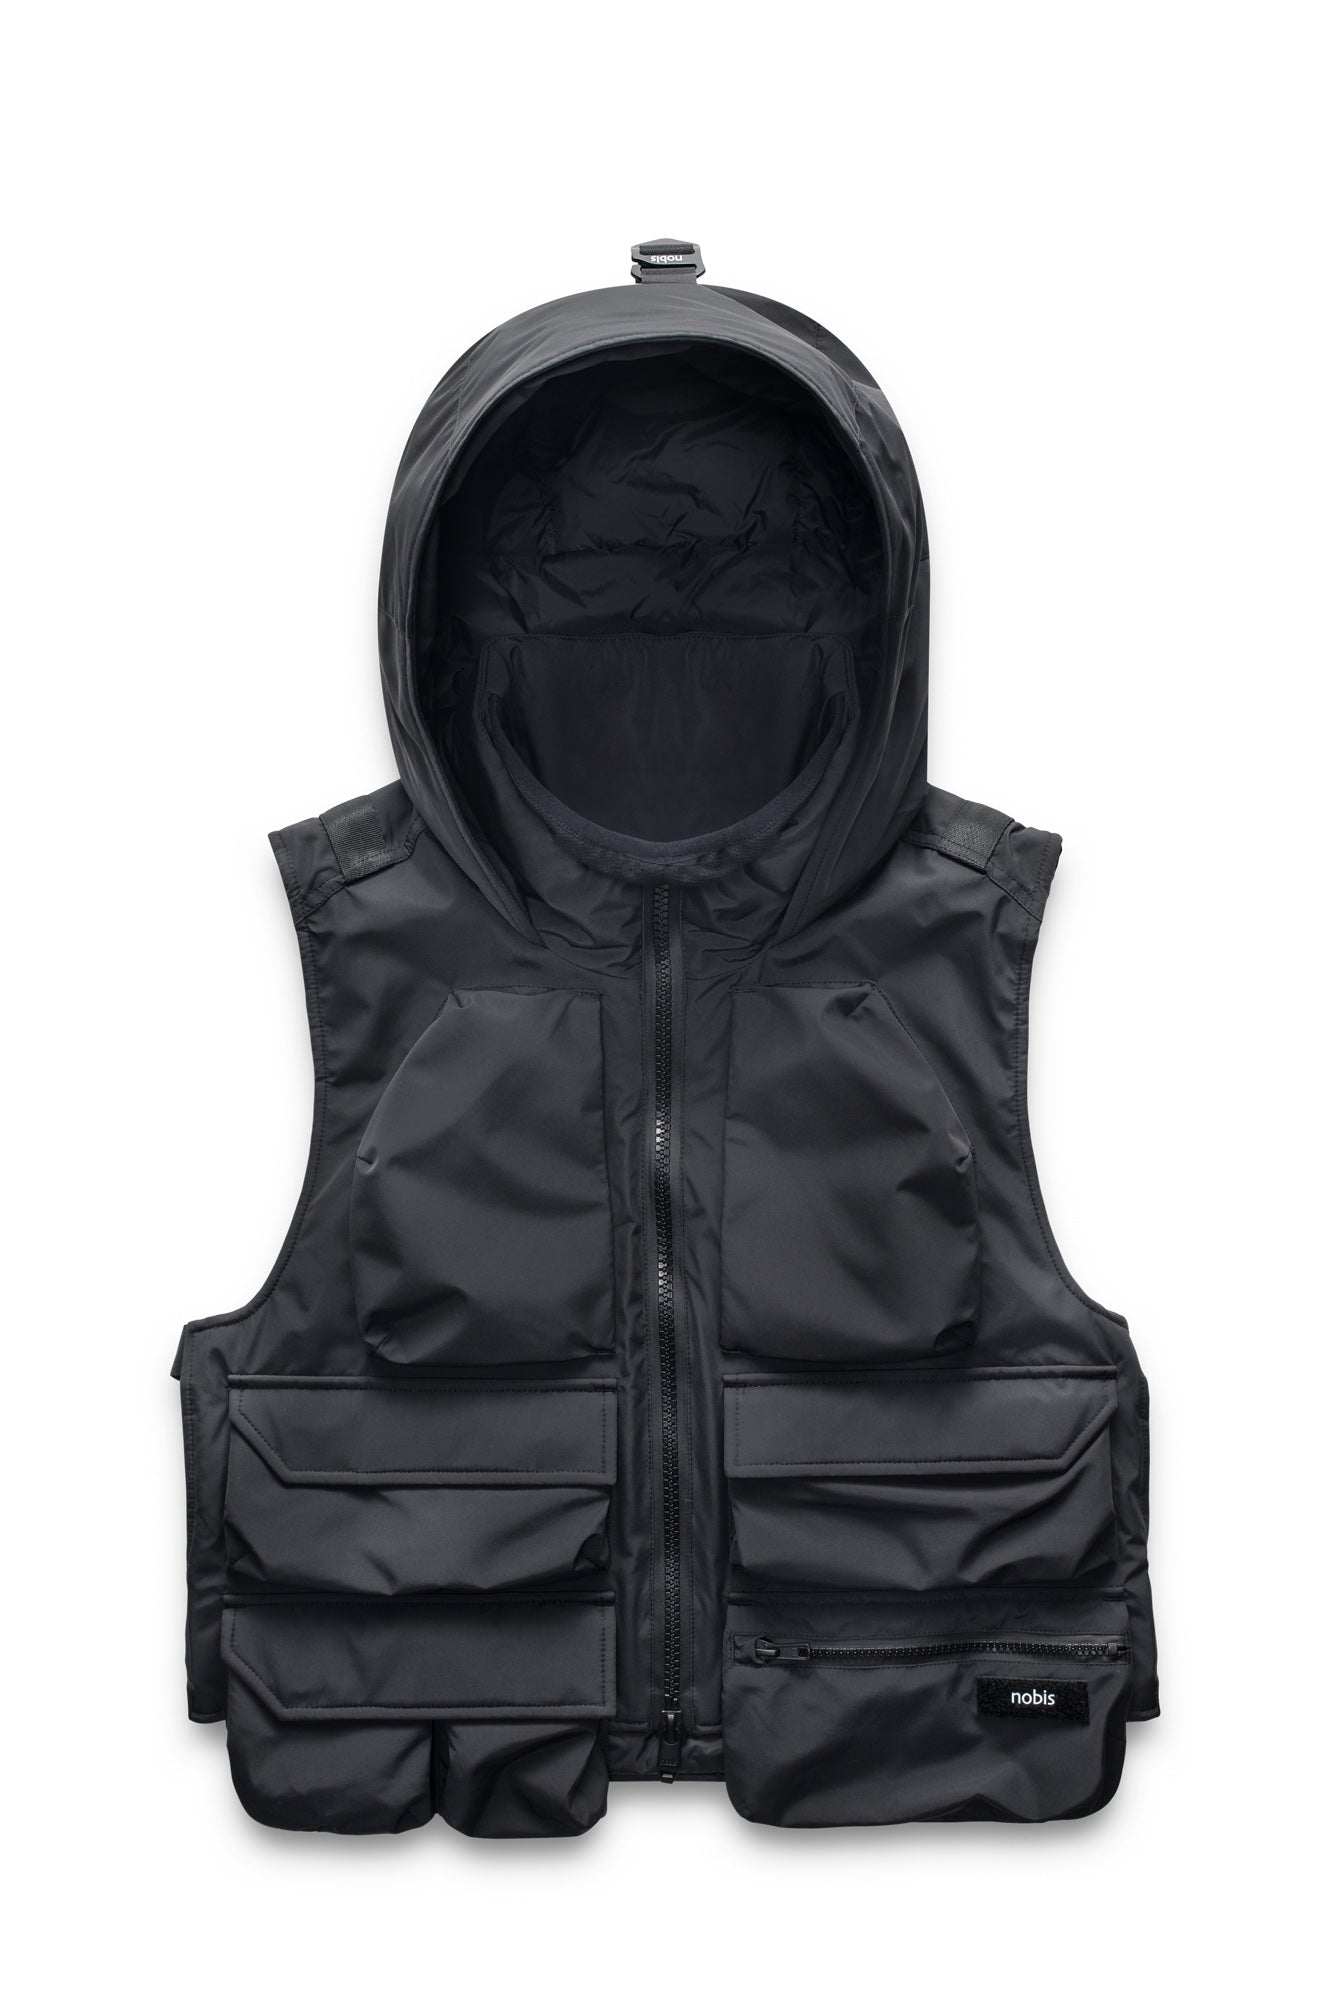 Vulcan Unisex Tactical Vest in waist length, Primaloft Gold Insulation Active, non-removable hood, removable face mask, seven pockets on front and back, and two-way front zipper, in Black